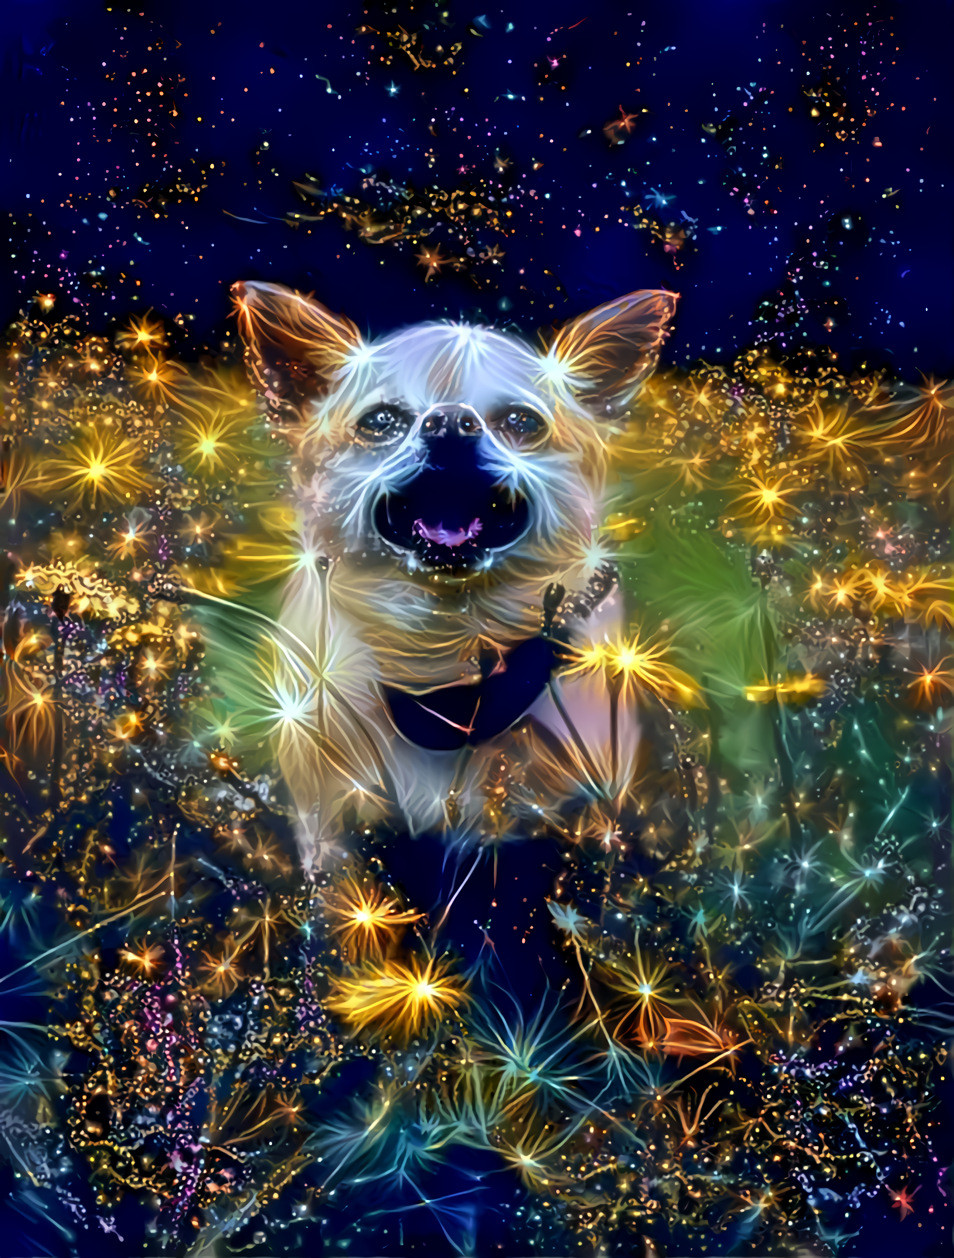 Doggy in the rain of stars